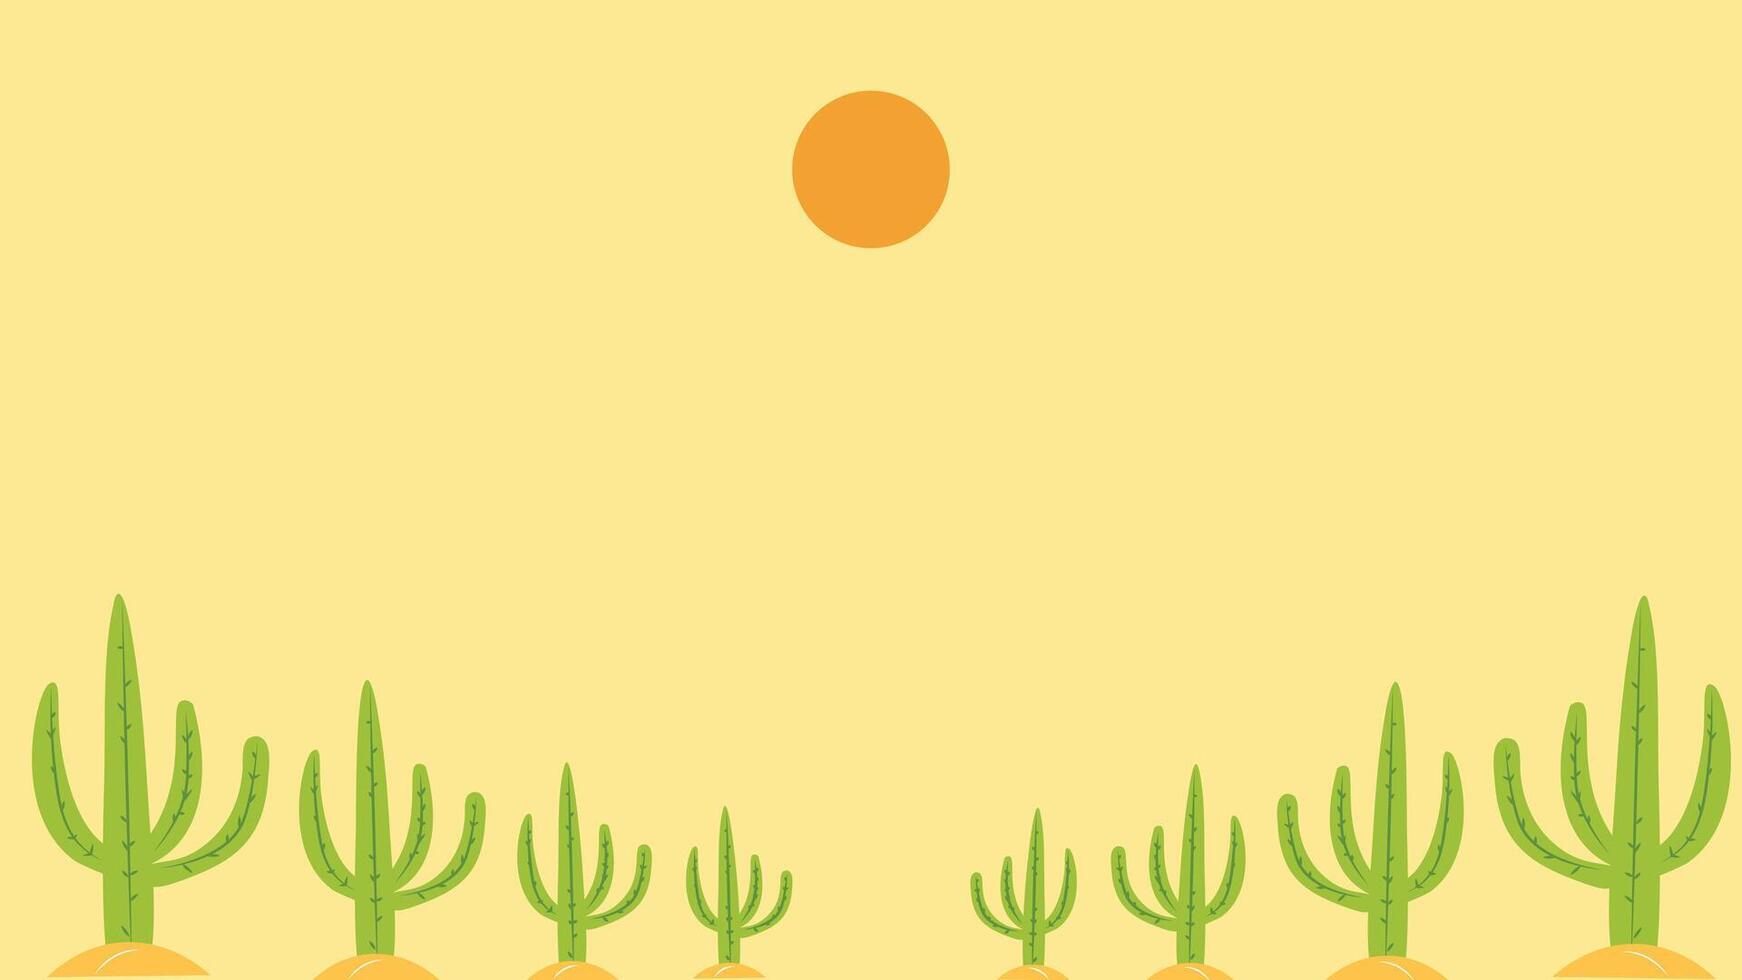 Summer background with cactus vector